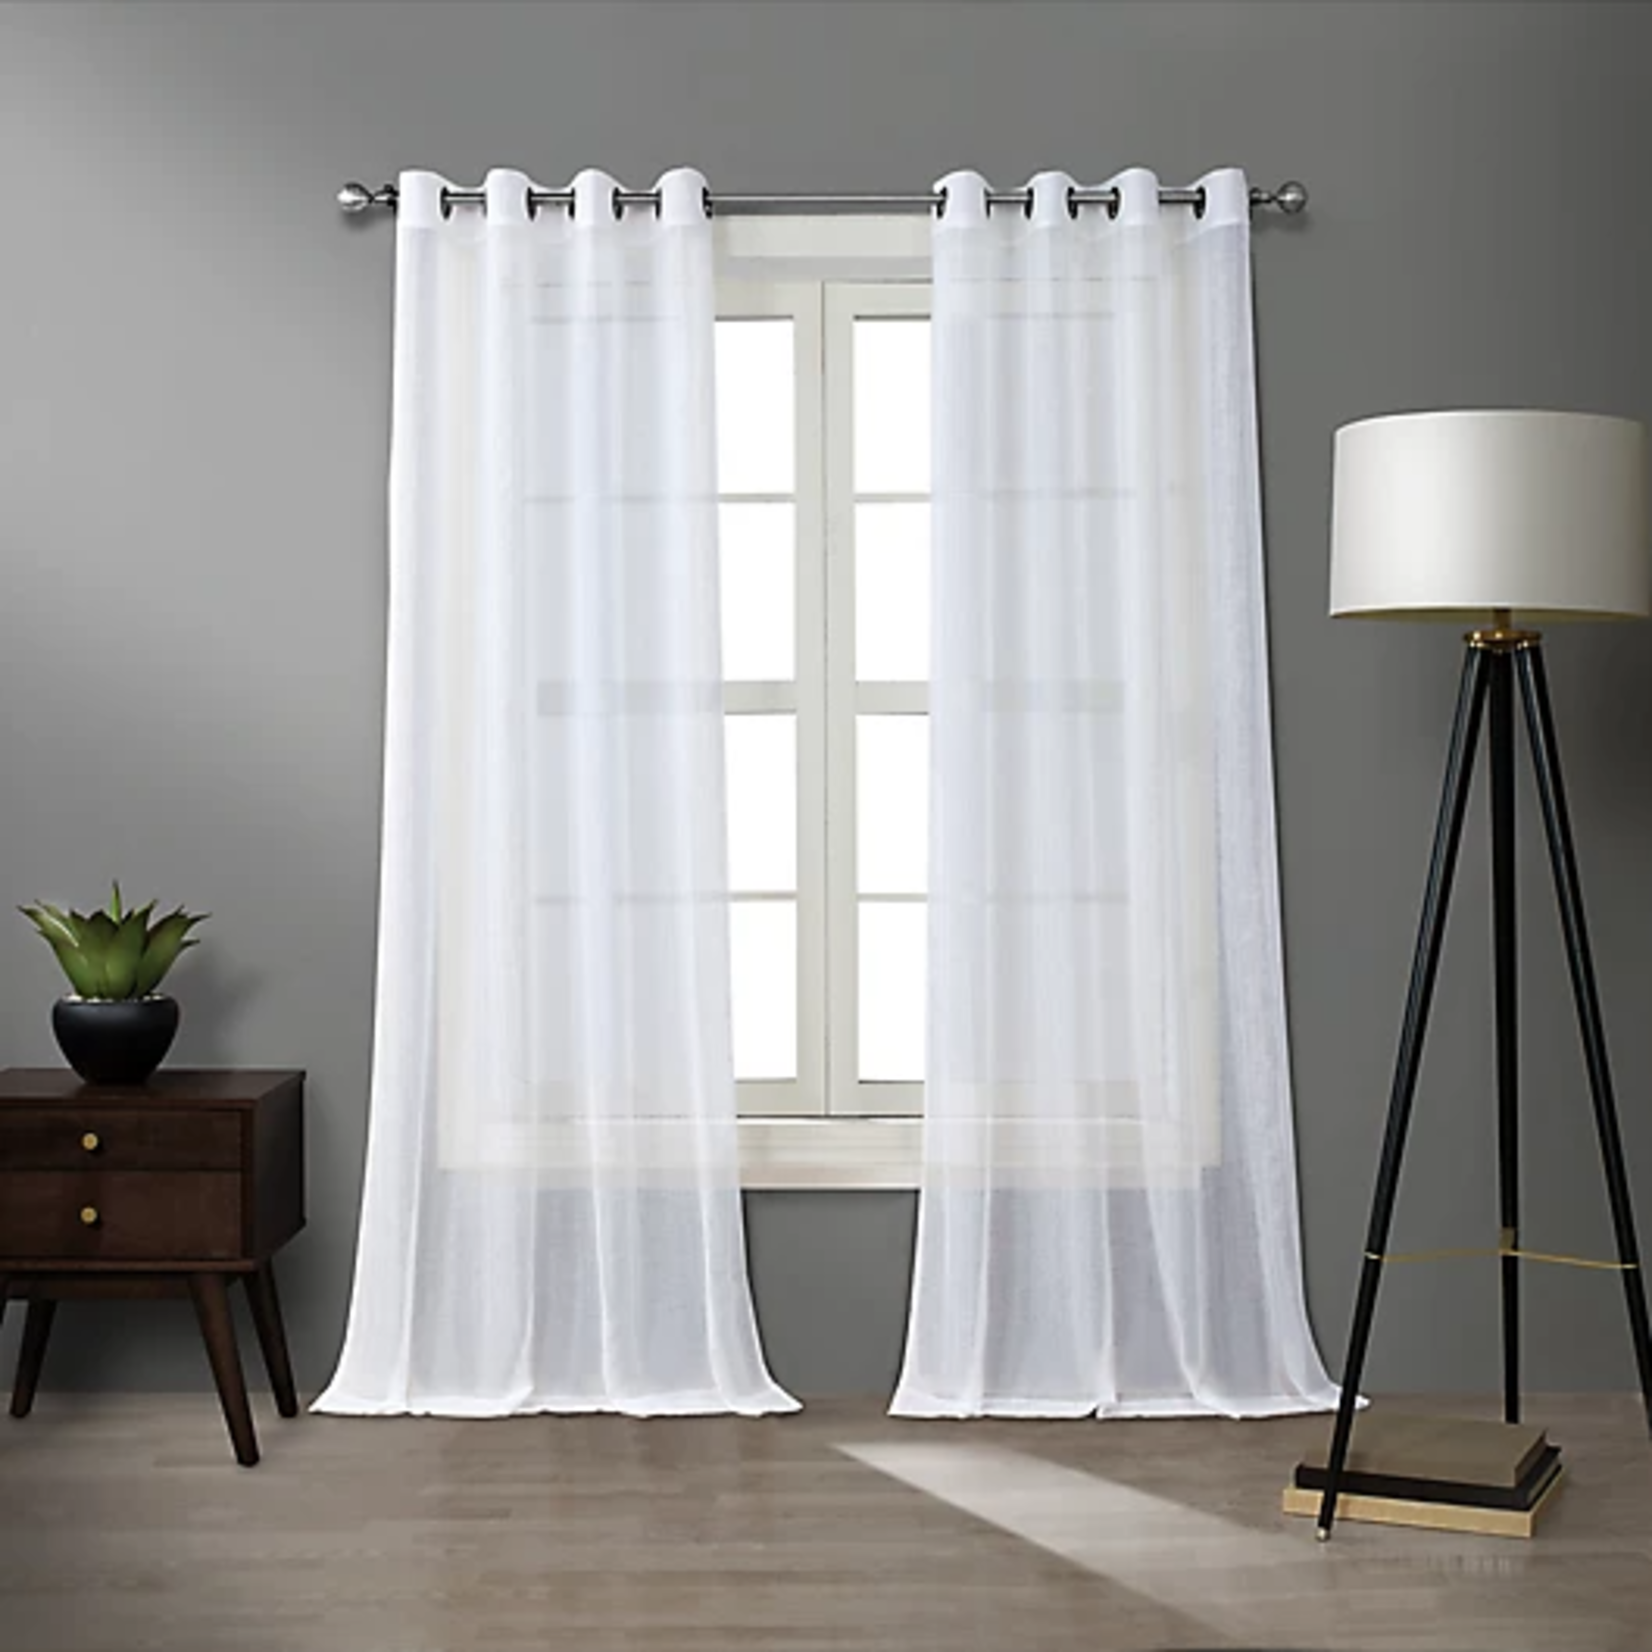 O&O by Olivia & Oliver | Walker Sheer Curtain Panel 95" - White/Silver**